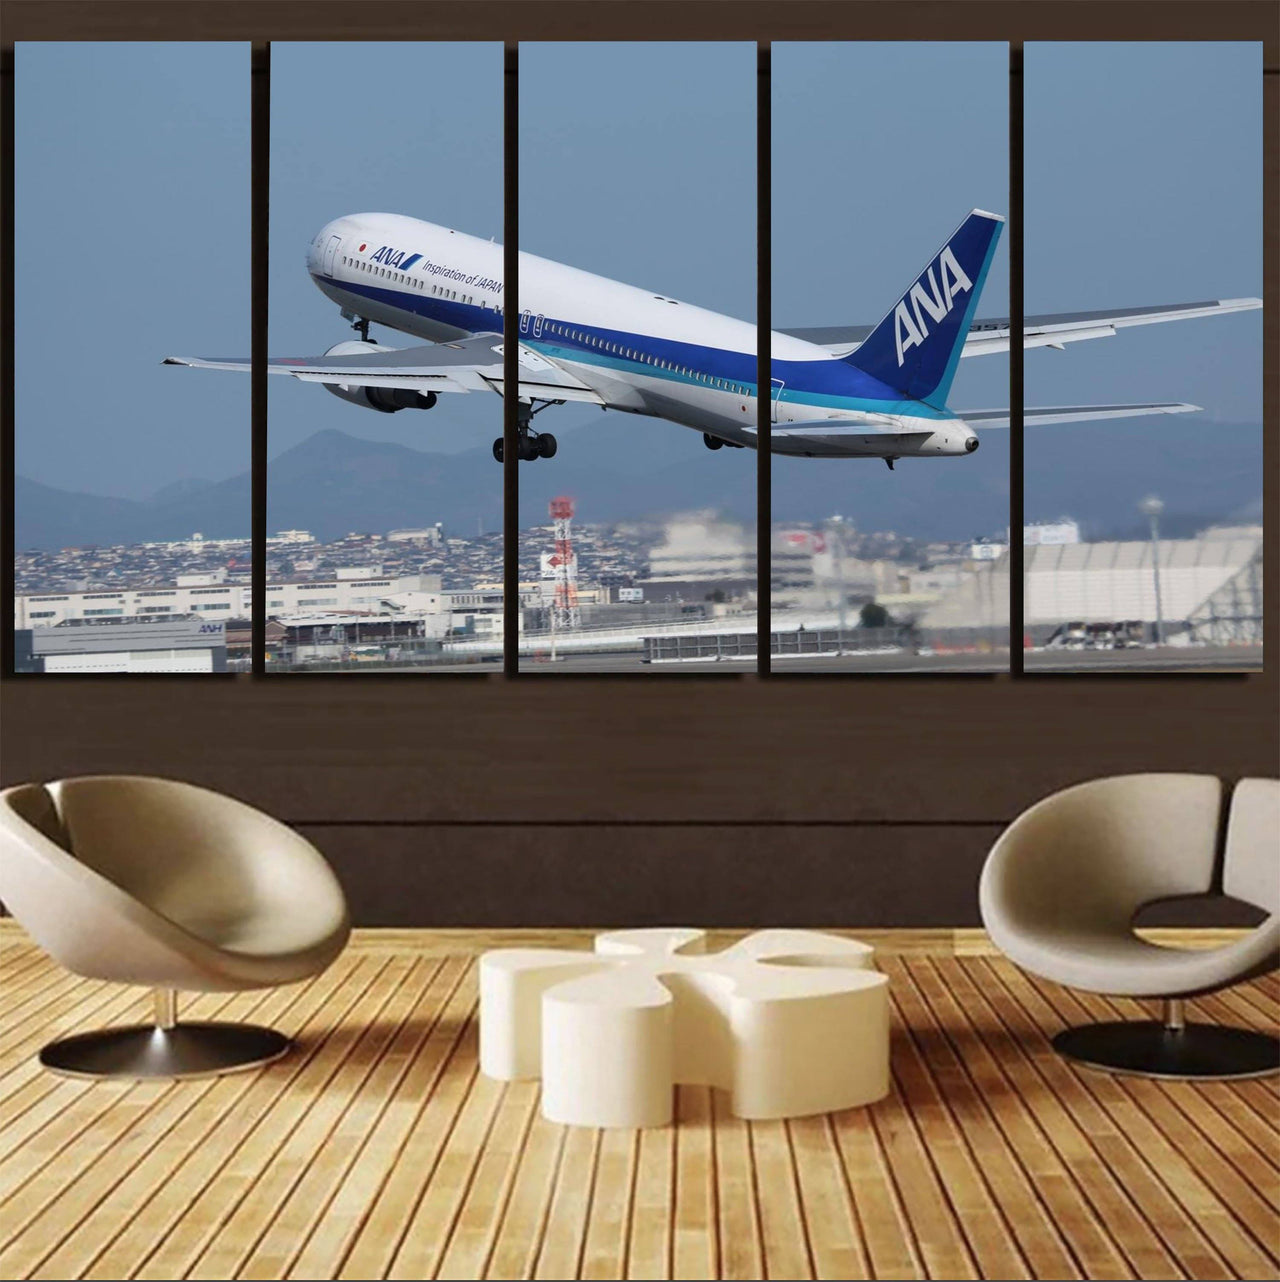 Departing ANA's Boeing 767 Printed Canvas Prints (5 Pieces) Aviation Shop 